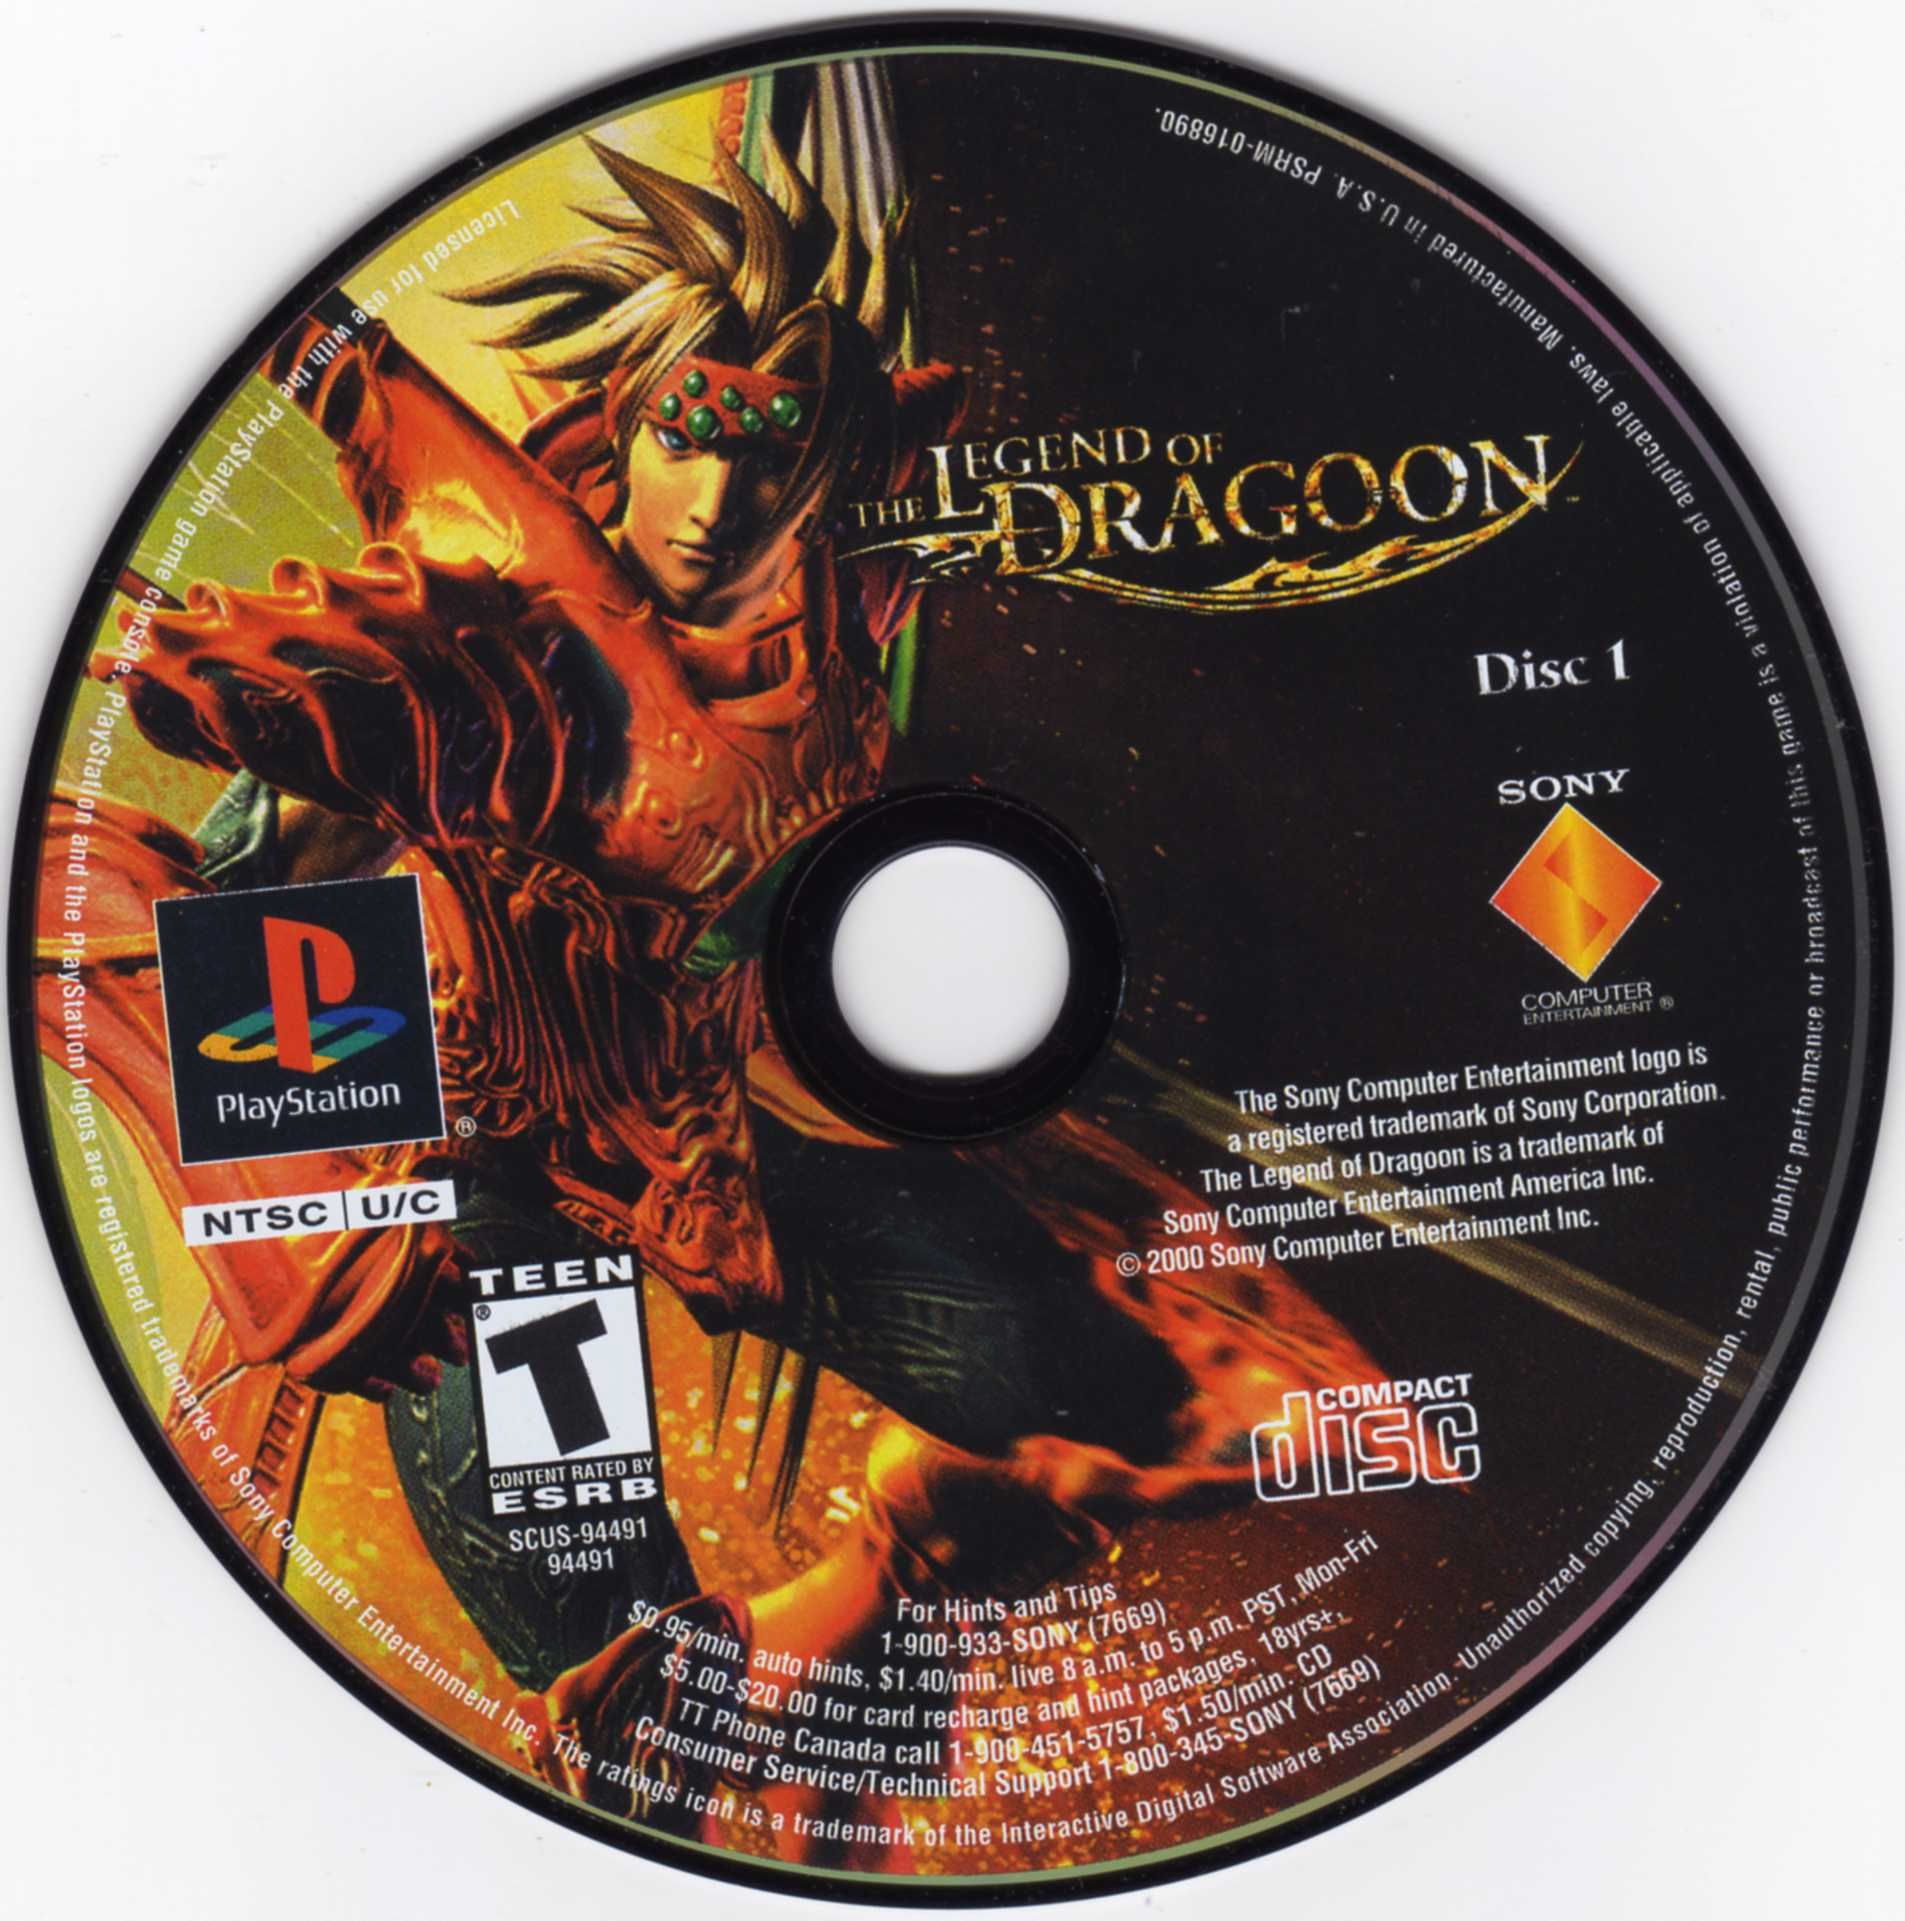 The Legend of Dragoon PSX cover